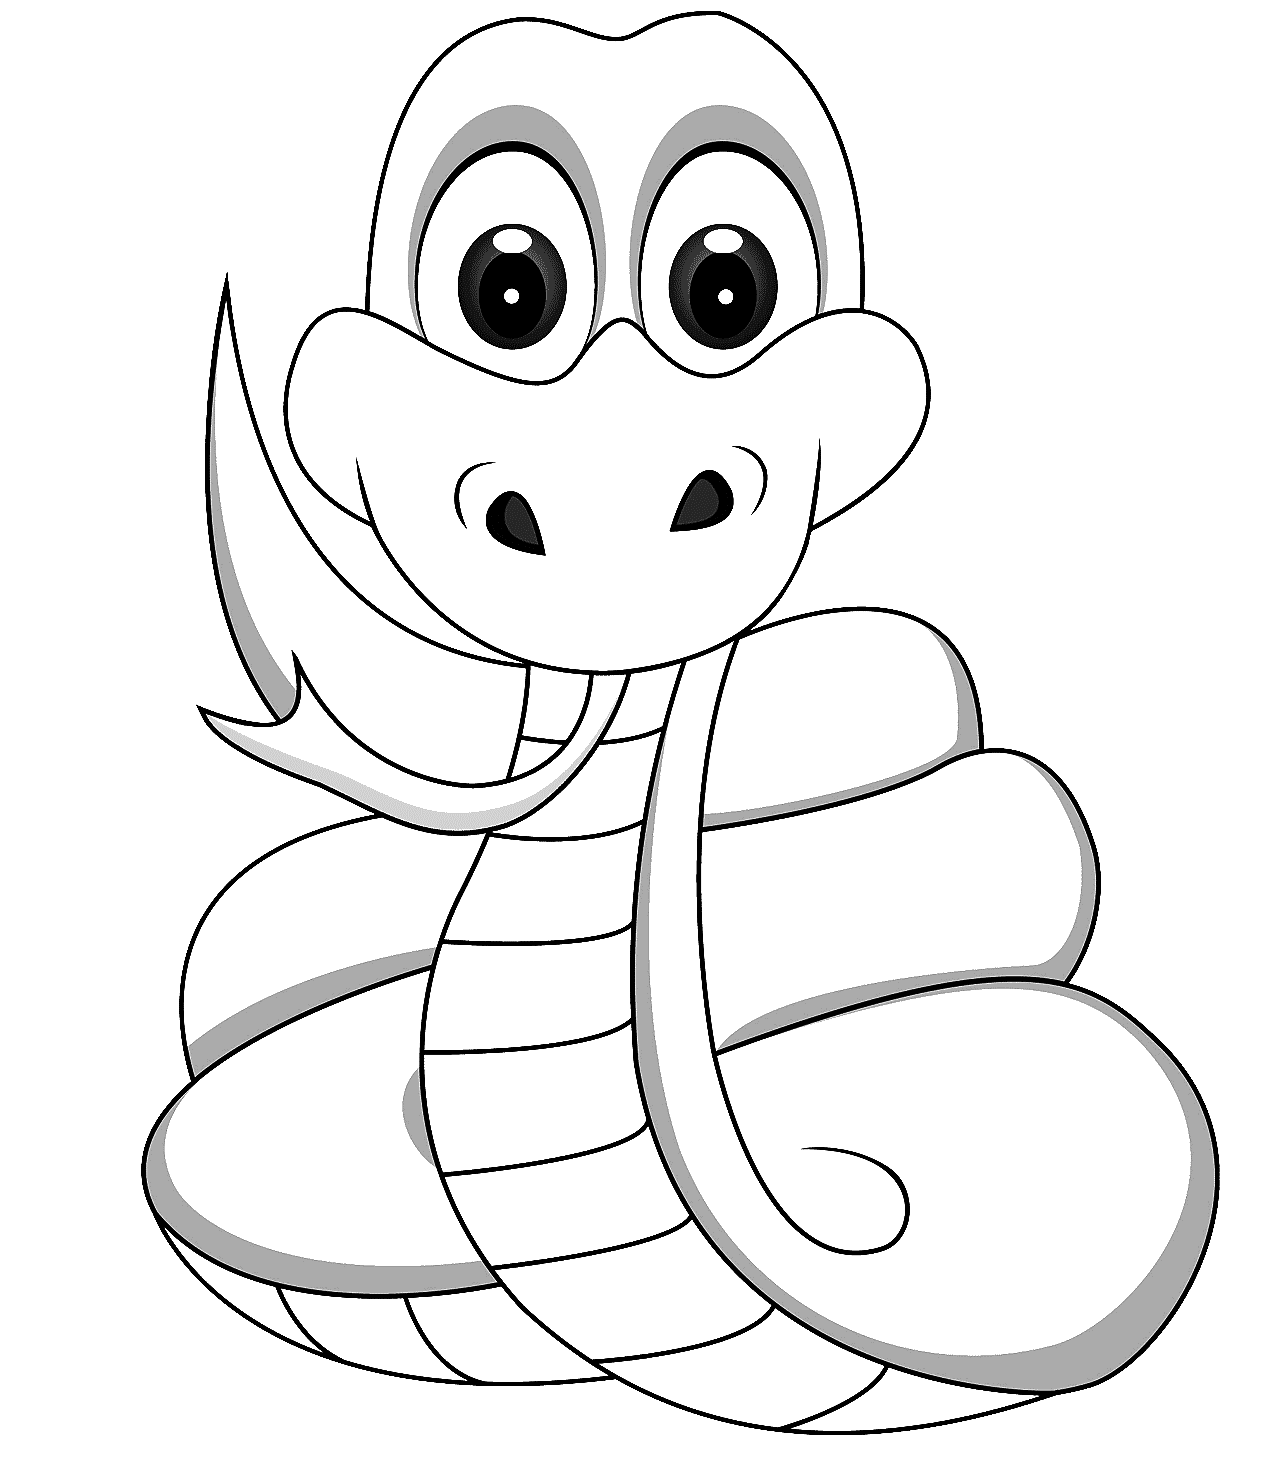 cute baby animal colouring pictures baby dinosaur coloring pages for preschoolers dinosaur baby animal colouring cute pictures 